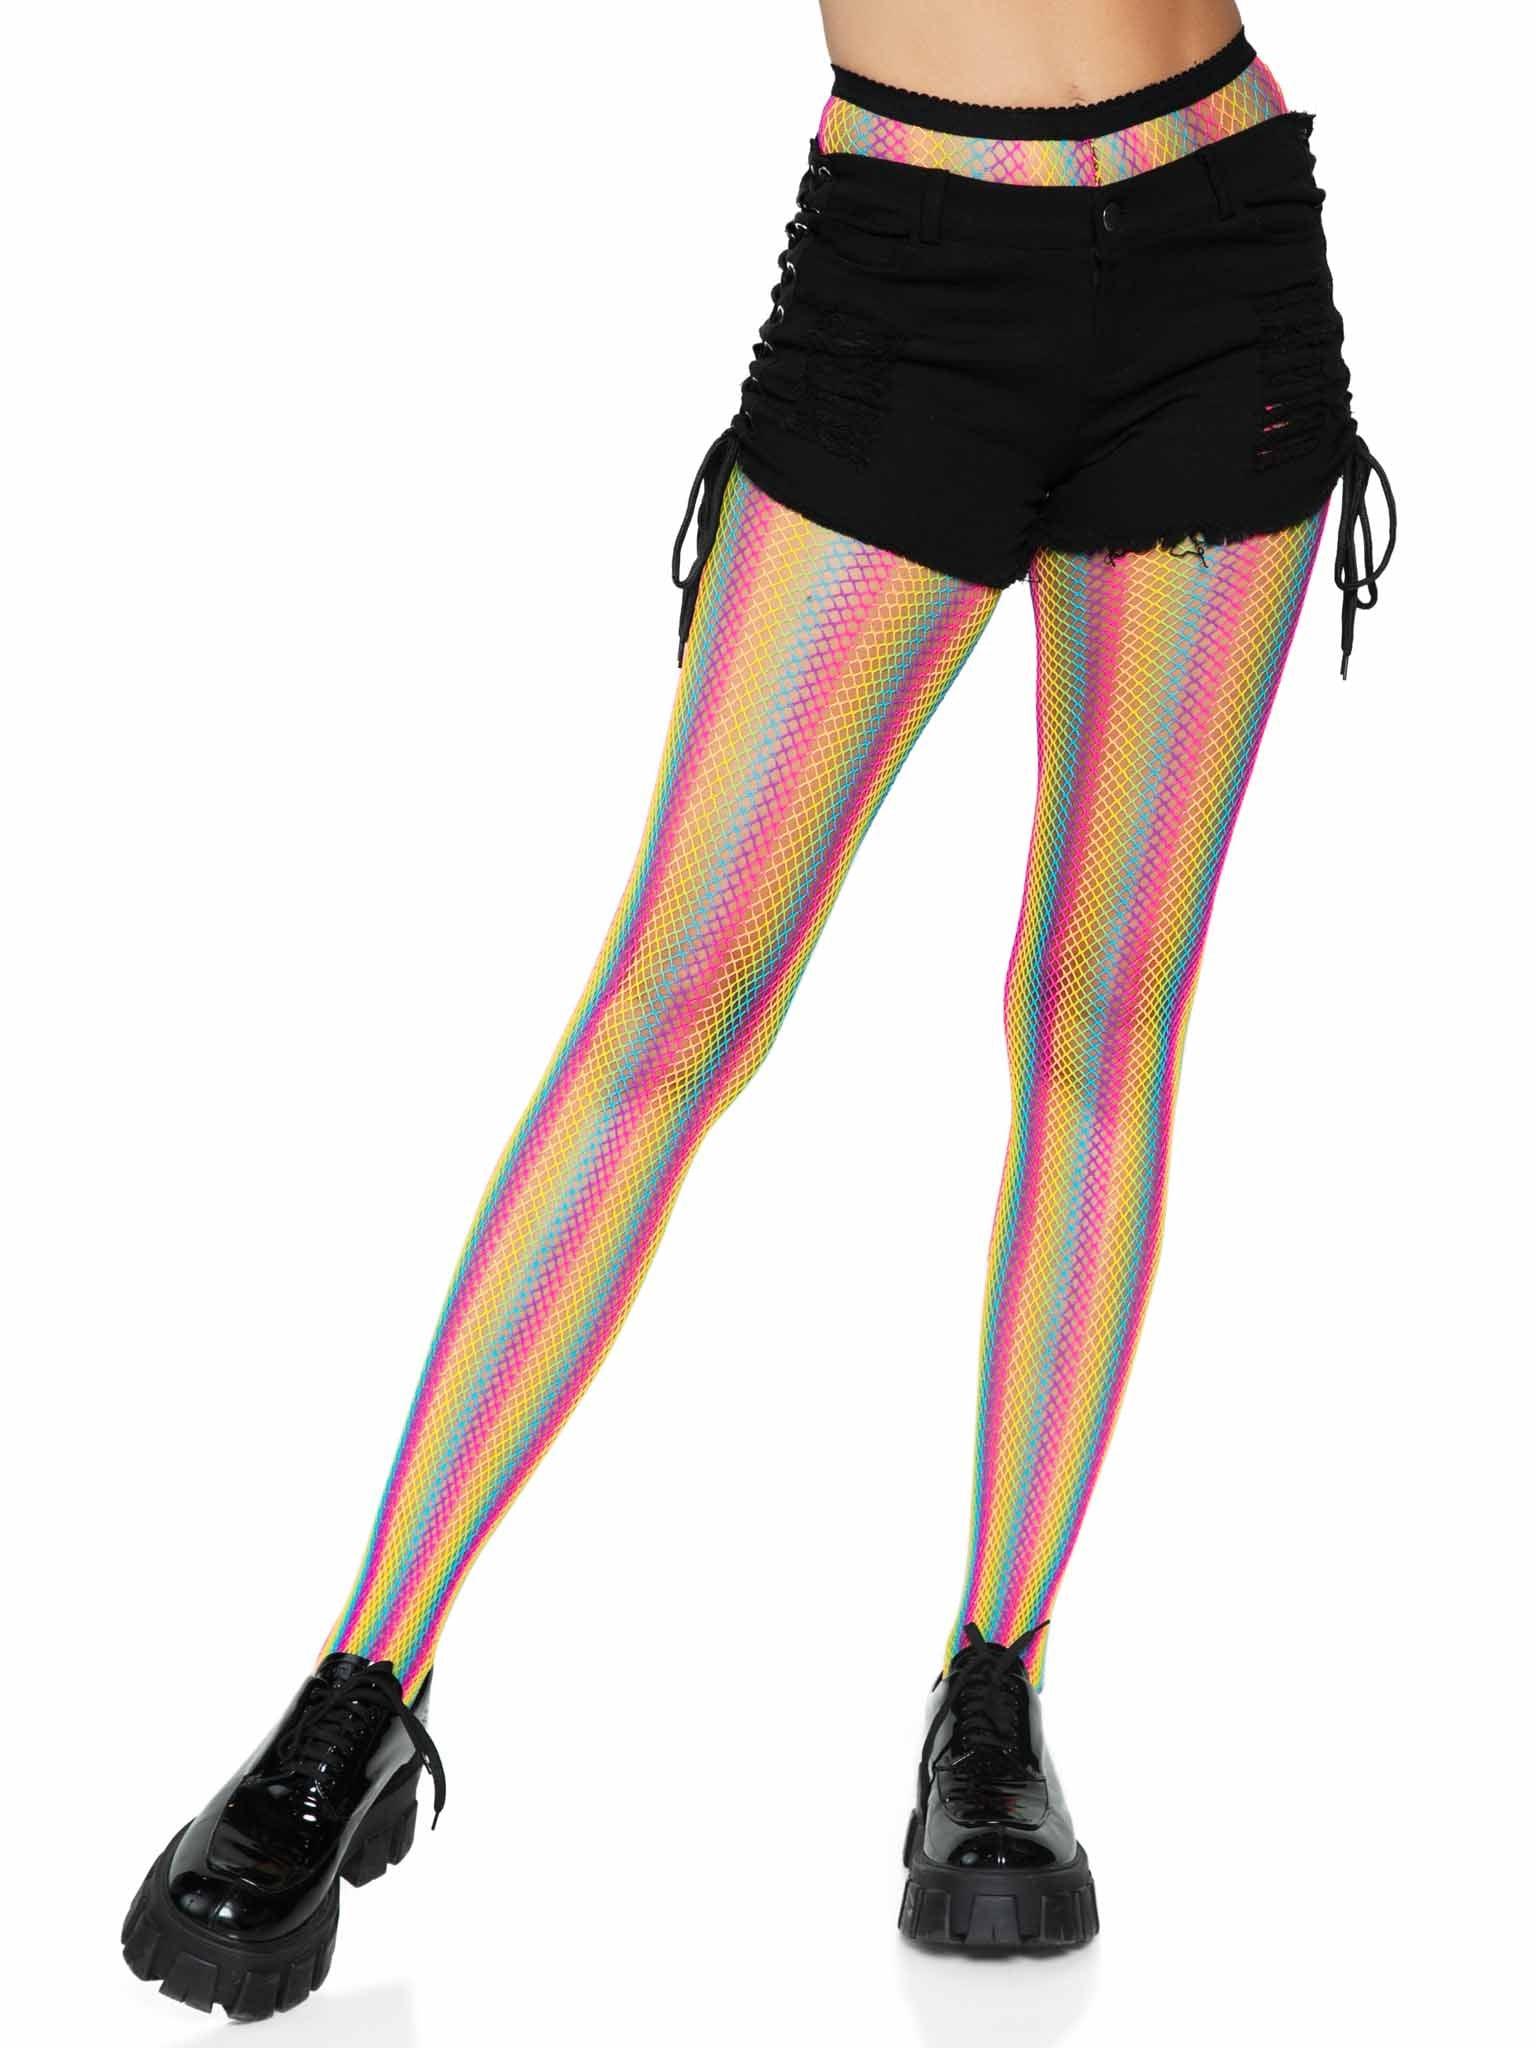 Neon Rainbow Striped Fishnet Tights - One Size - Multicolor - My Sex Toy Hub